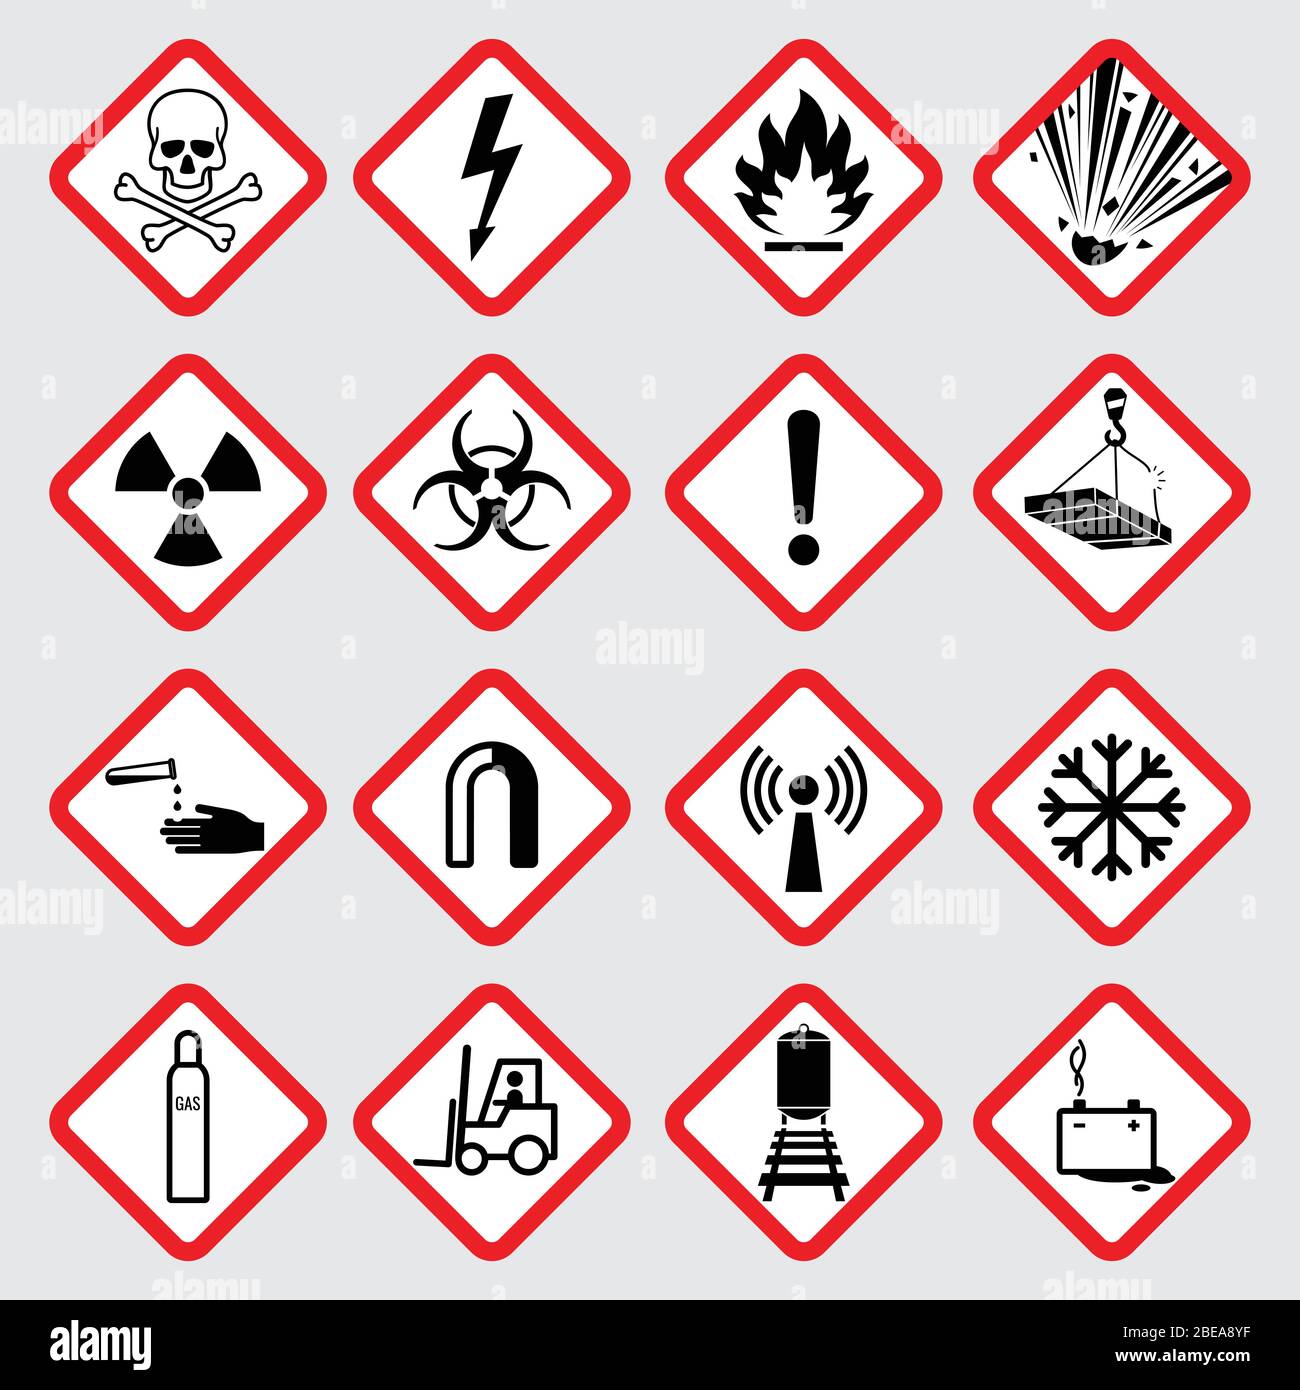 Warning hazard vector pictograms. Illustration of danger caution symbol, toxic and poison Stock Vector